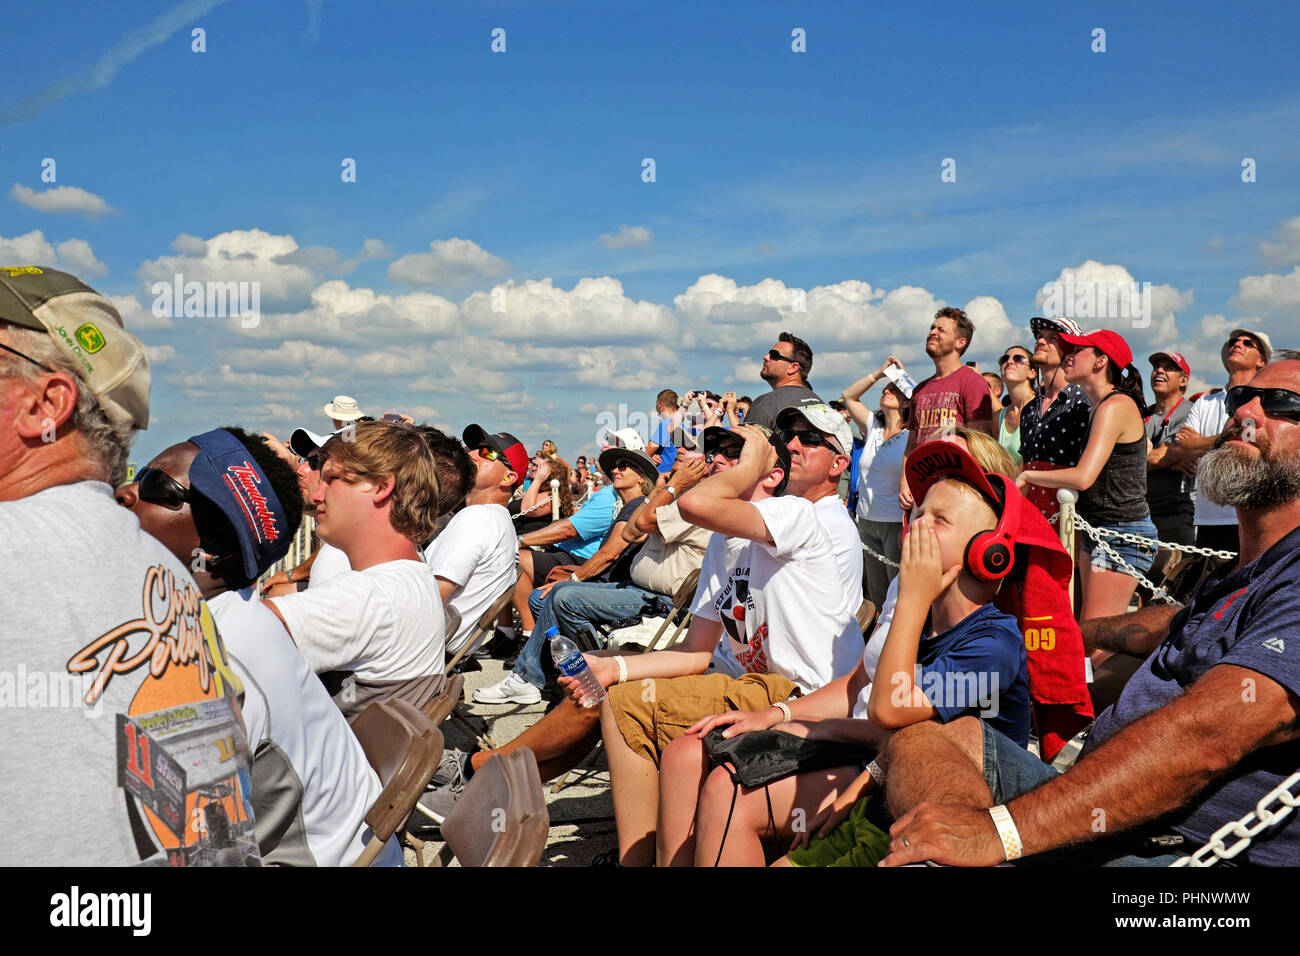 Cleveland, Ohio, USA, 1st Sept, 2018.  Spectators at the 54th Annual Cleveland National Airshow at Burke Lakefront Airport watch the show with some covering their ears from the roar of the planes overhead.  Considered one of the top air shows in the United States, this event is an annual tradition held over the US Labor Day holiday weekend bringing tens of thousands to the shores of Lake Erie to watch the event.  Credit: Mark Kanning/Alamy Live News. Stock Photo